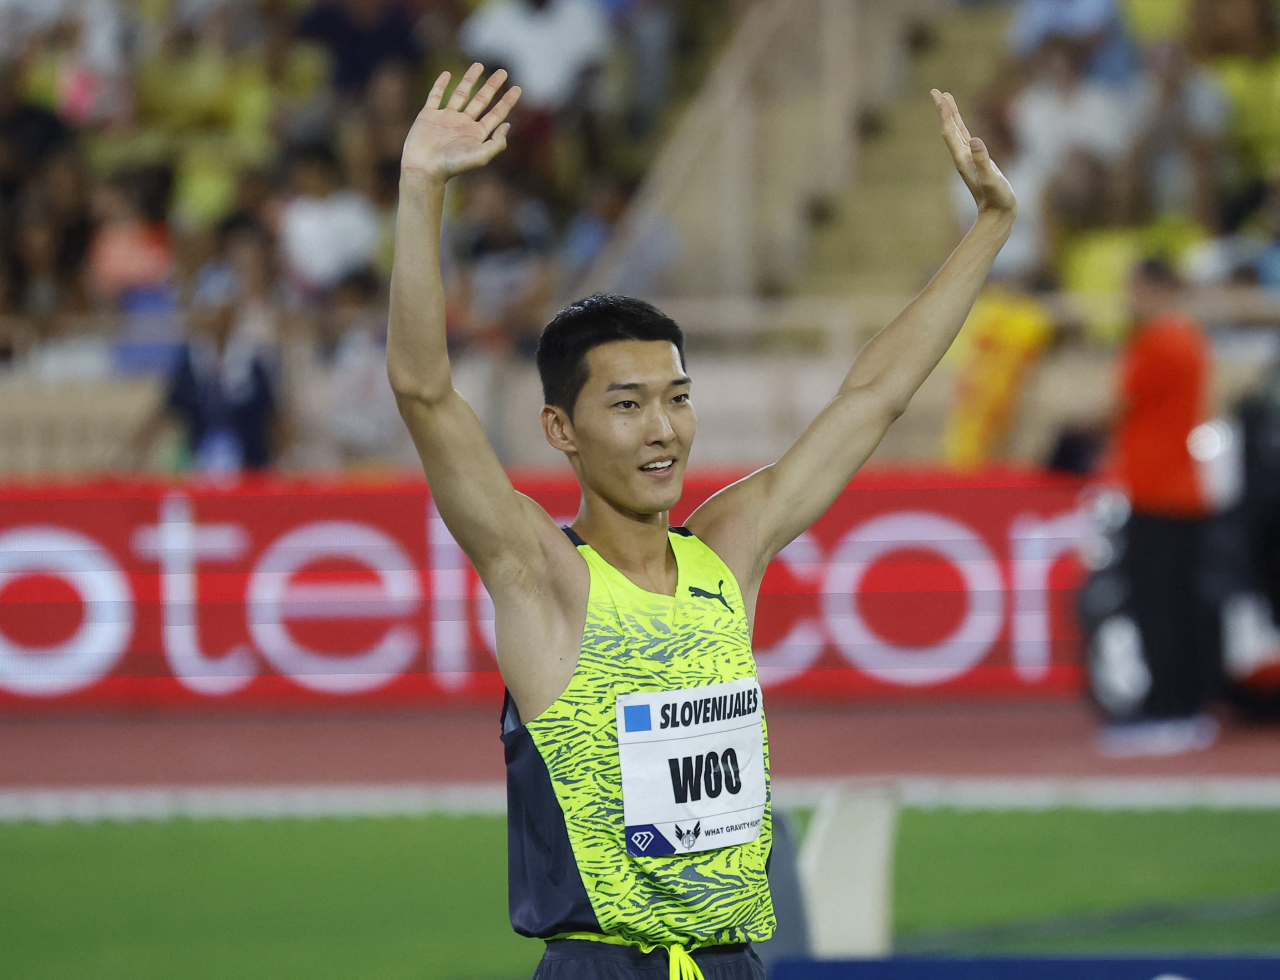 In this Reuters photo, Woo Sang-hyeok of South Korea celebrates a successful attempt during the men's high jump competition at the Diamond League at Stade Louis II in Monaco on Wednesday. (Reuters)